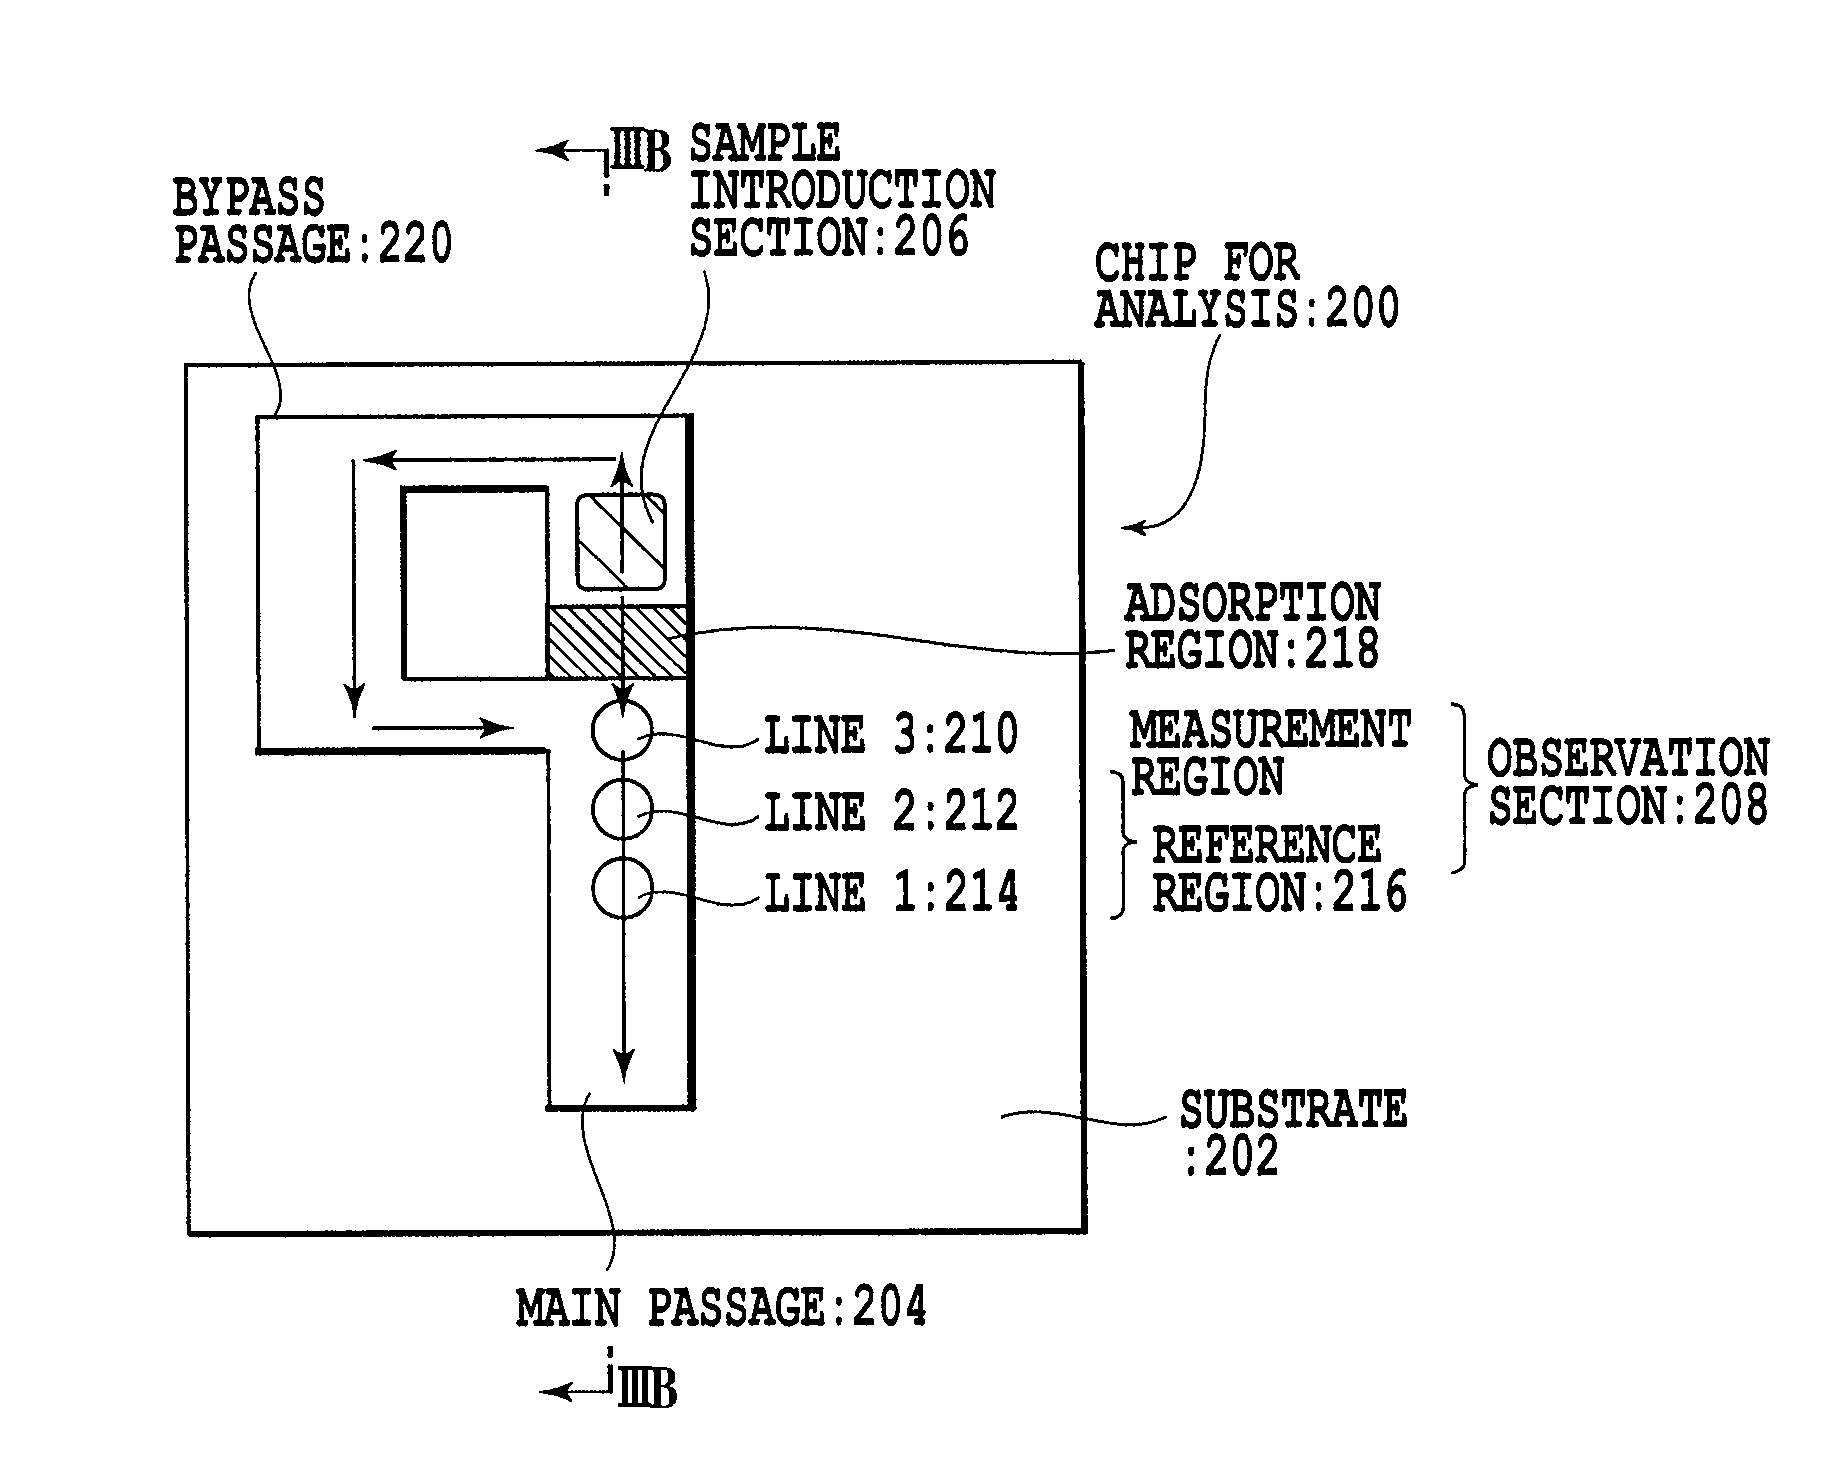 Chip for optical analysis